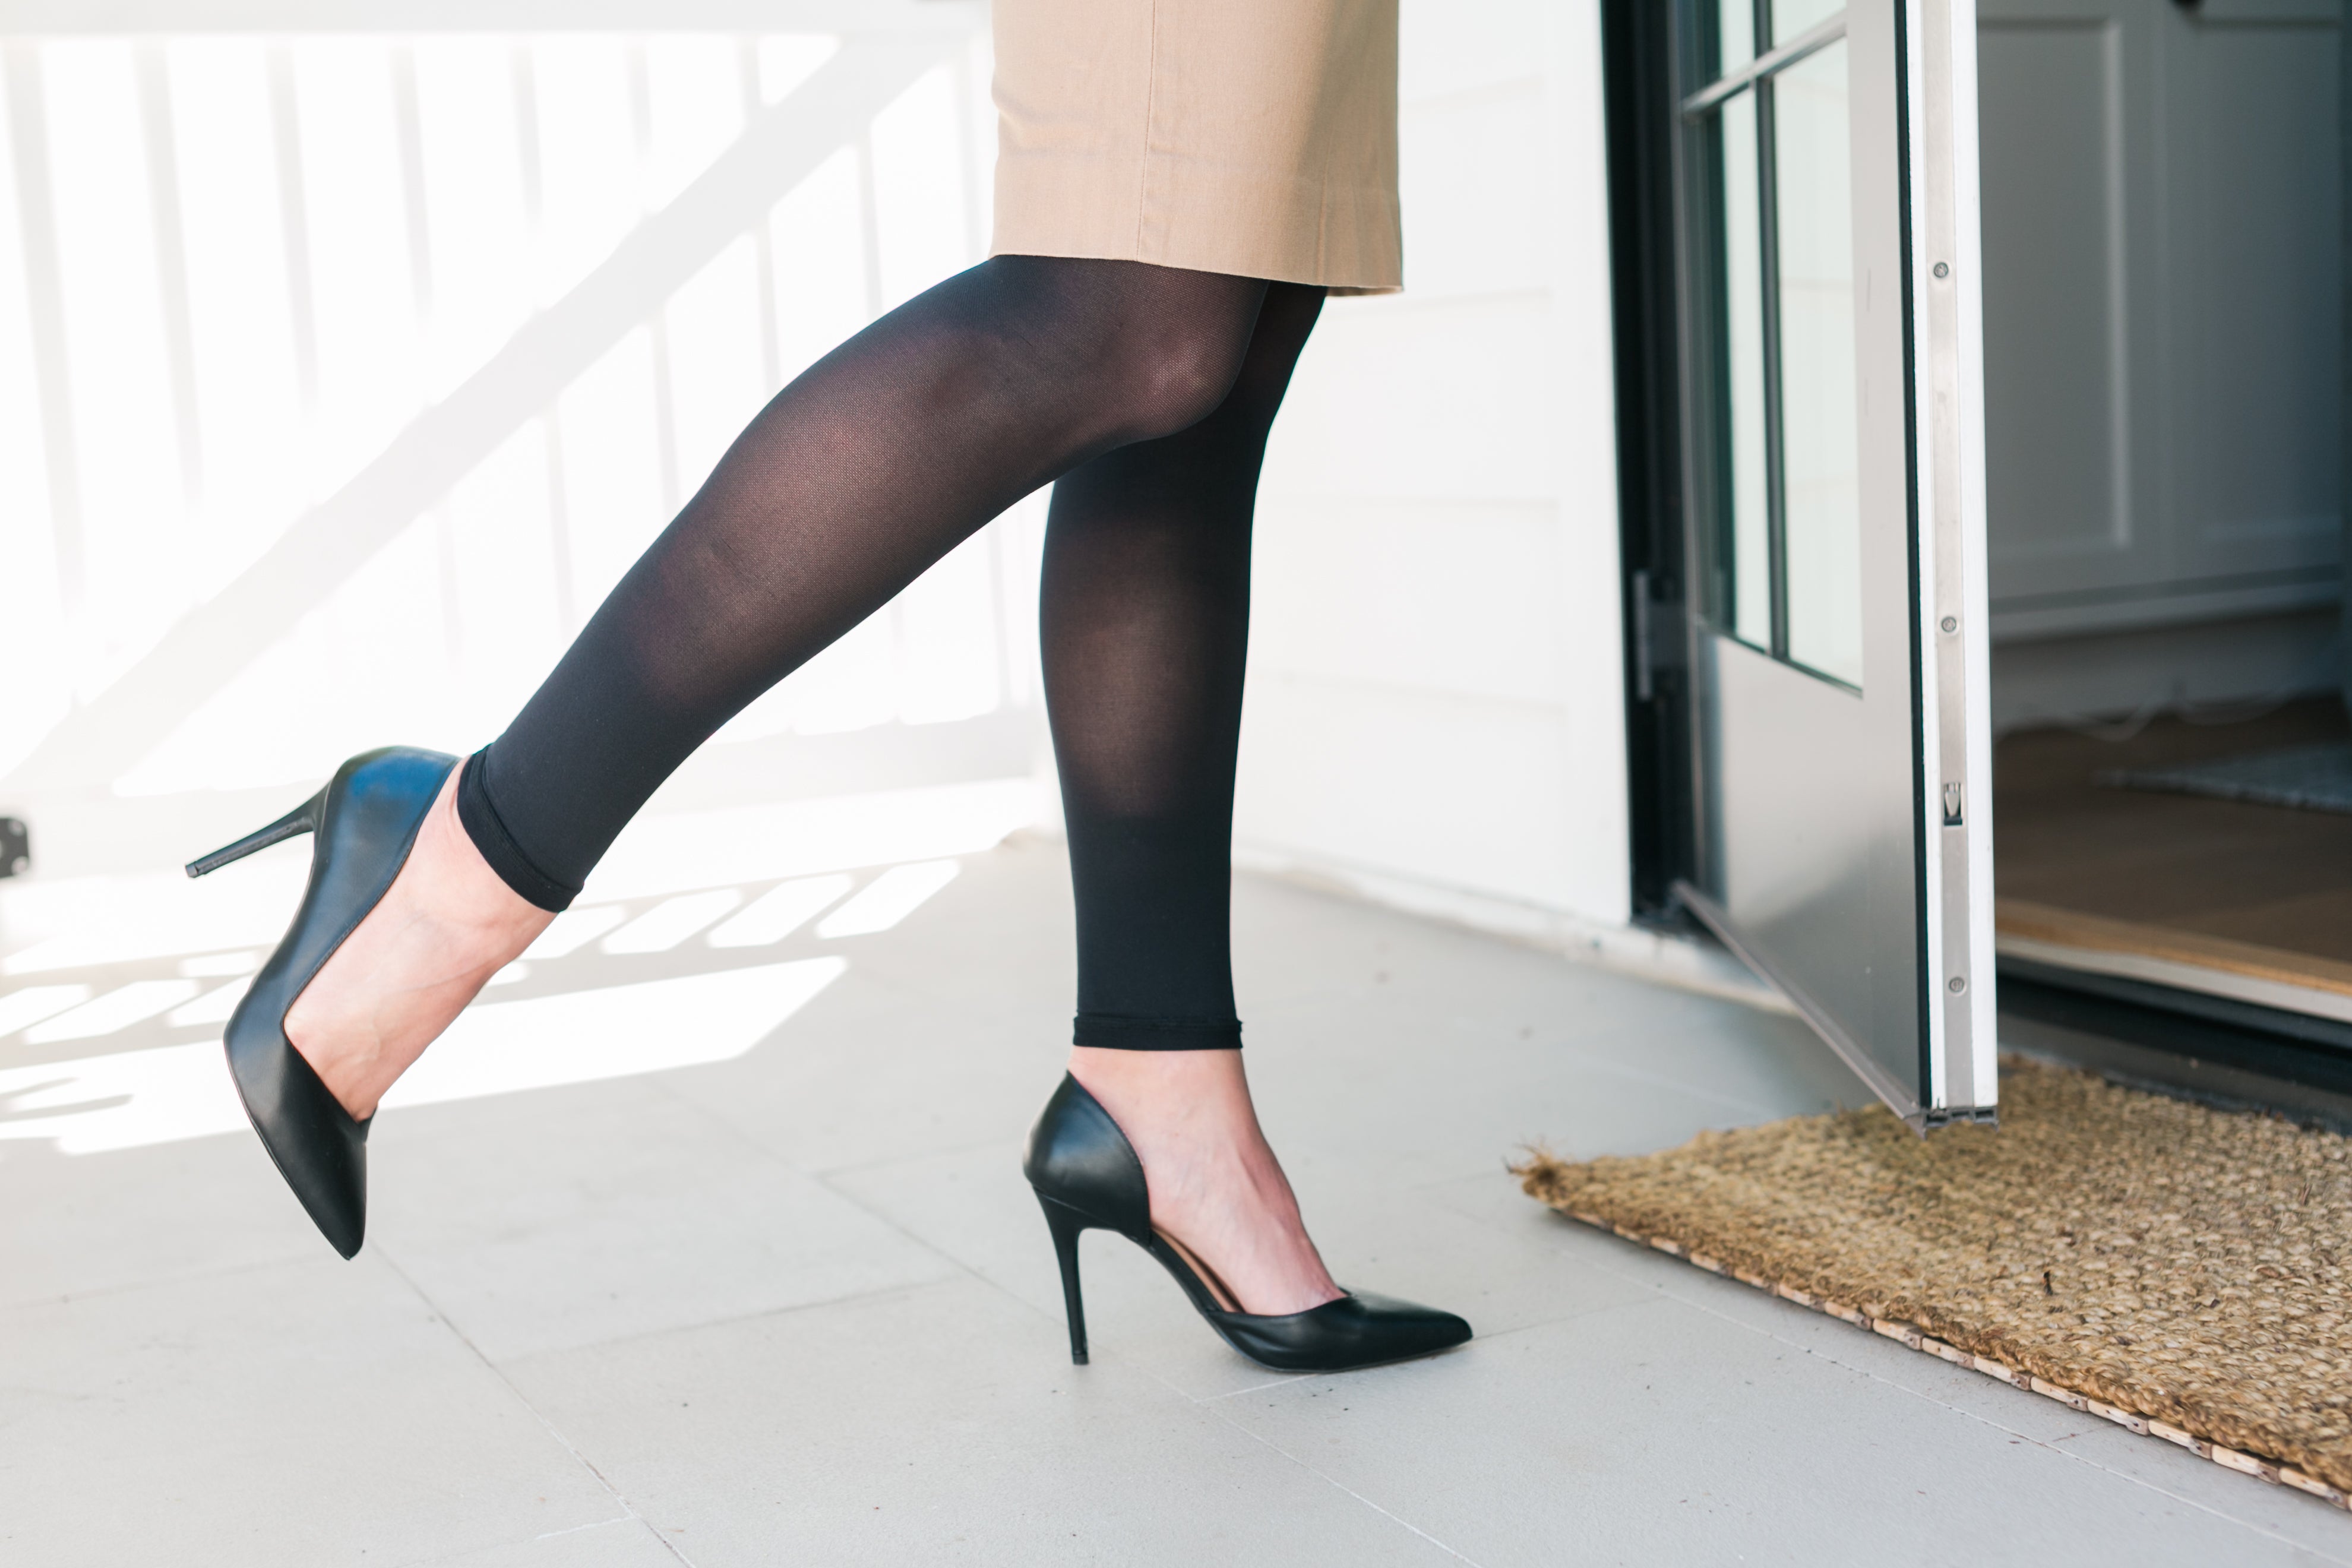 How to Choose Between Full-Length Compression Stocking Styles – REJUVA  Health